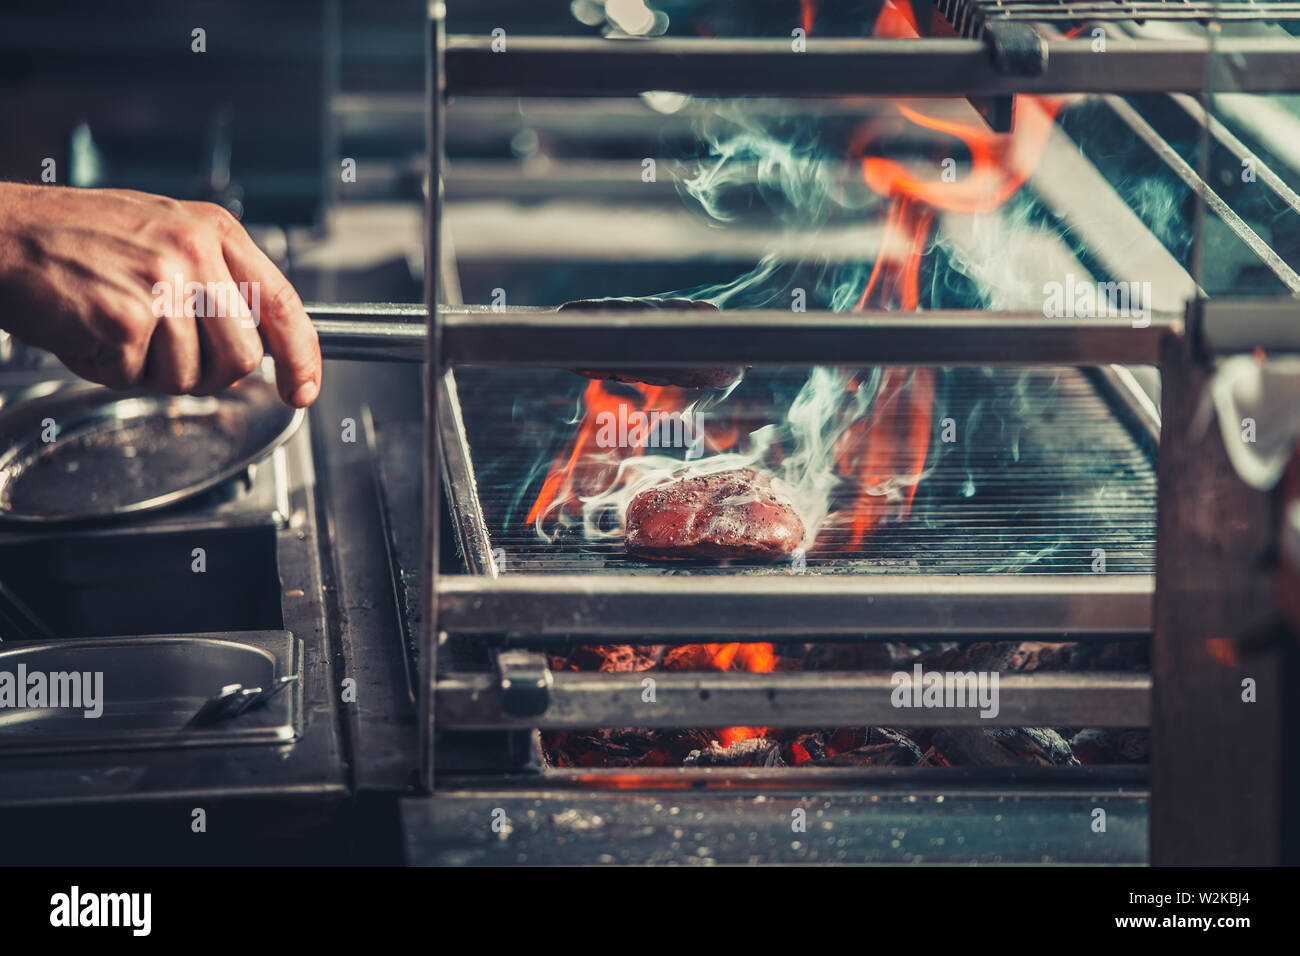 young male cooks preparing meal on the grill Stock Photo